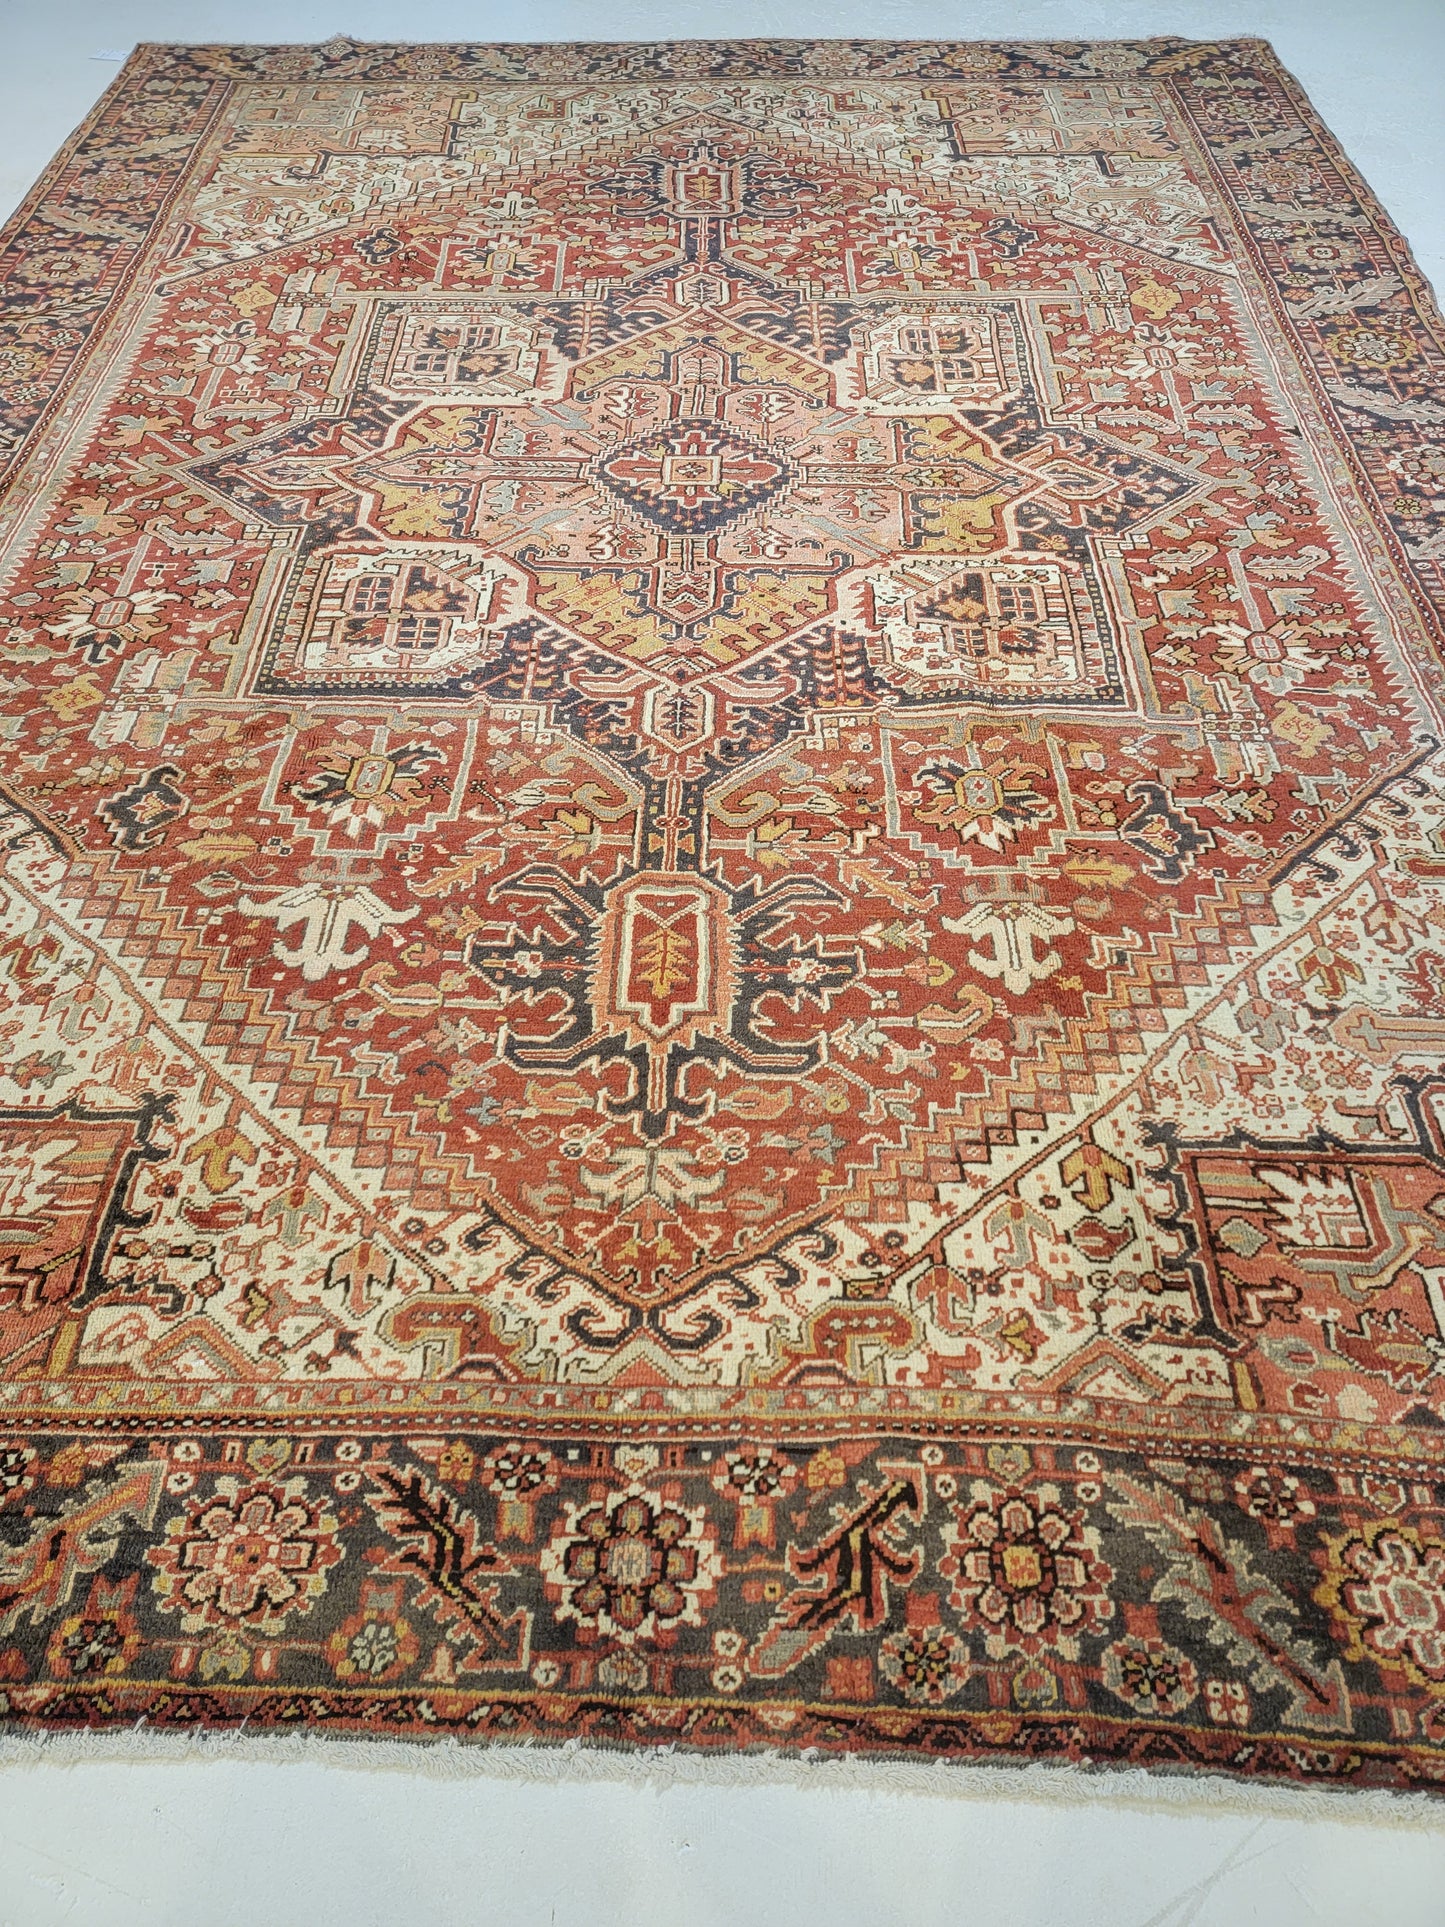 Antique Hand-Knotted Wool Area Rug Heriz 8'9" x 11'5"